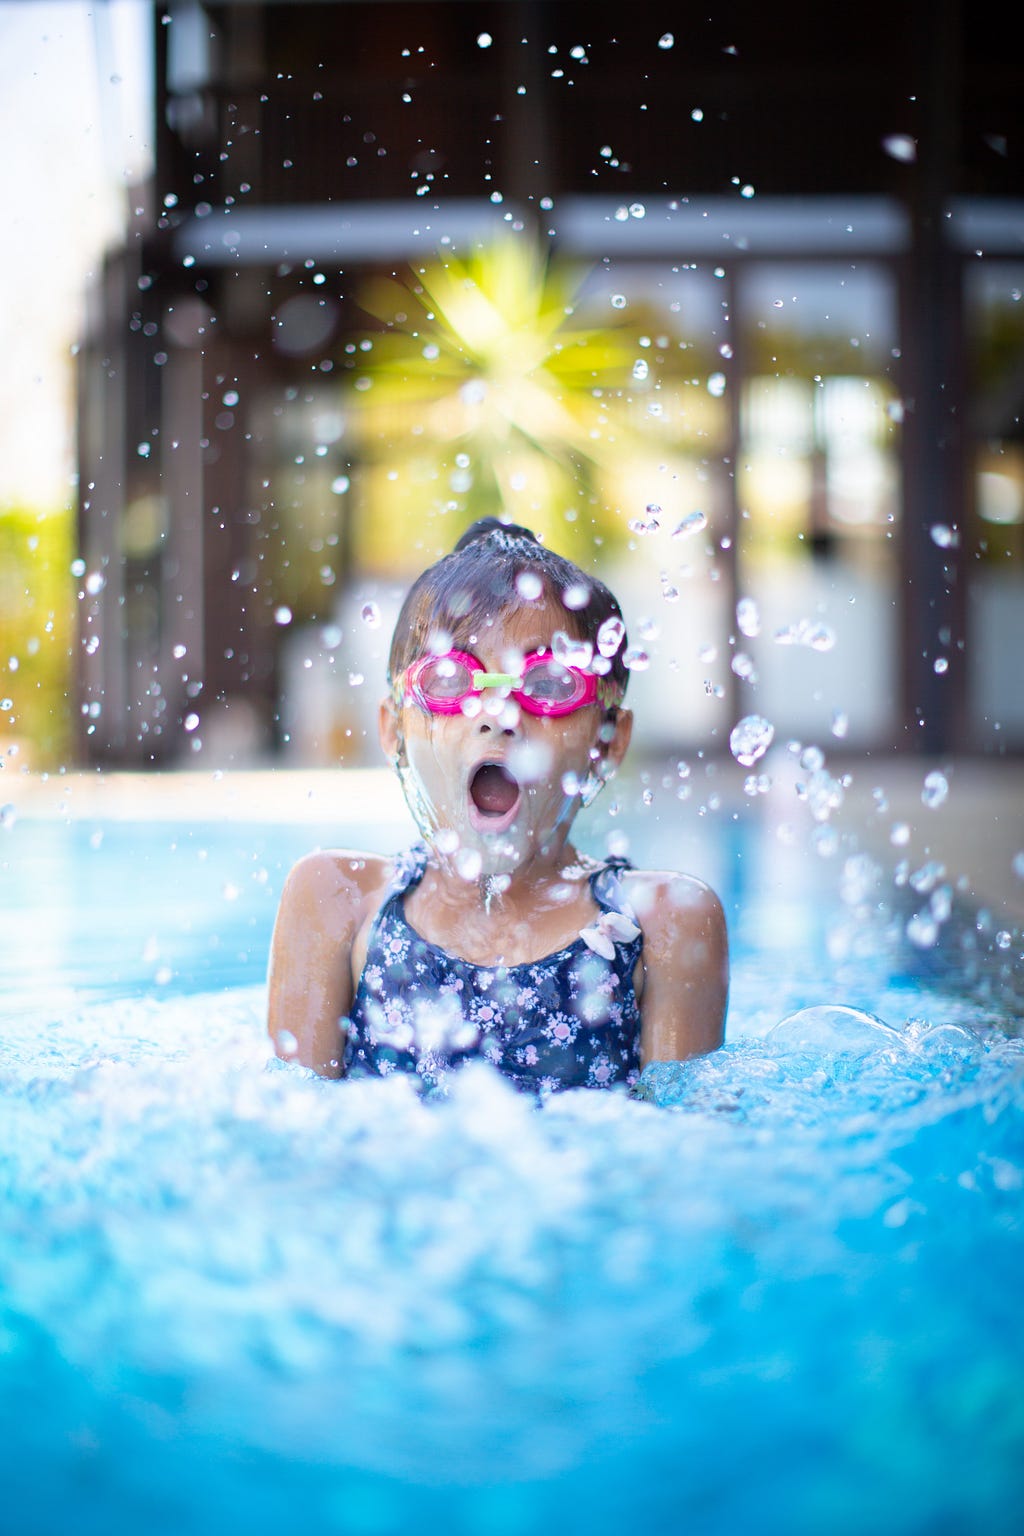 A young girl splashing in a pool.